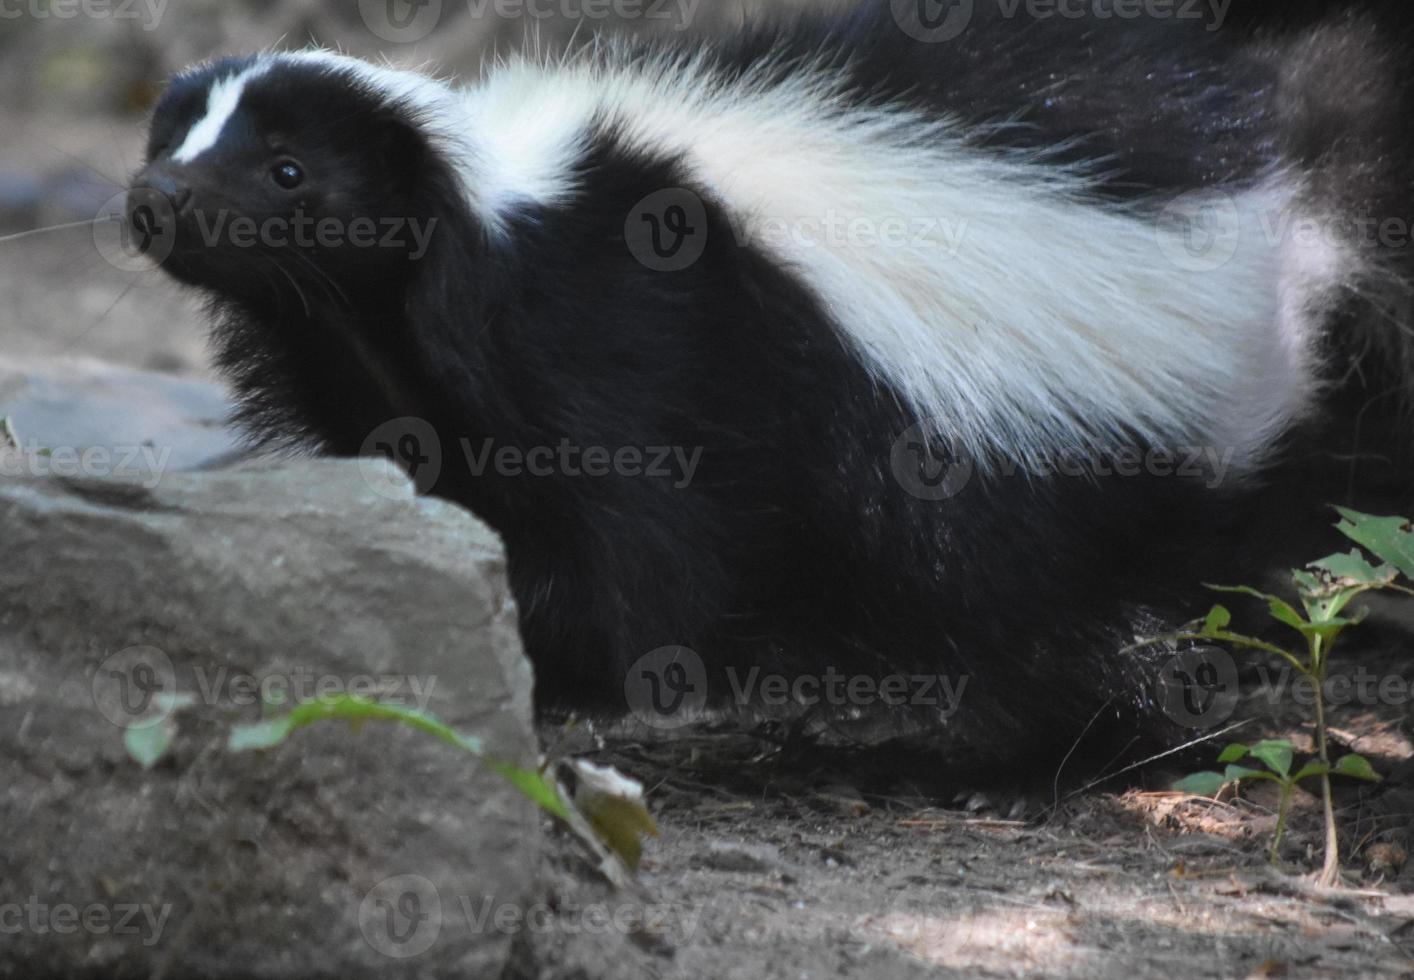 Very Sweet Expressive Black and White Skunk photo